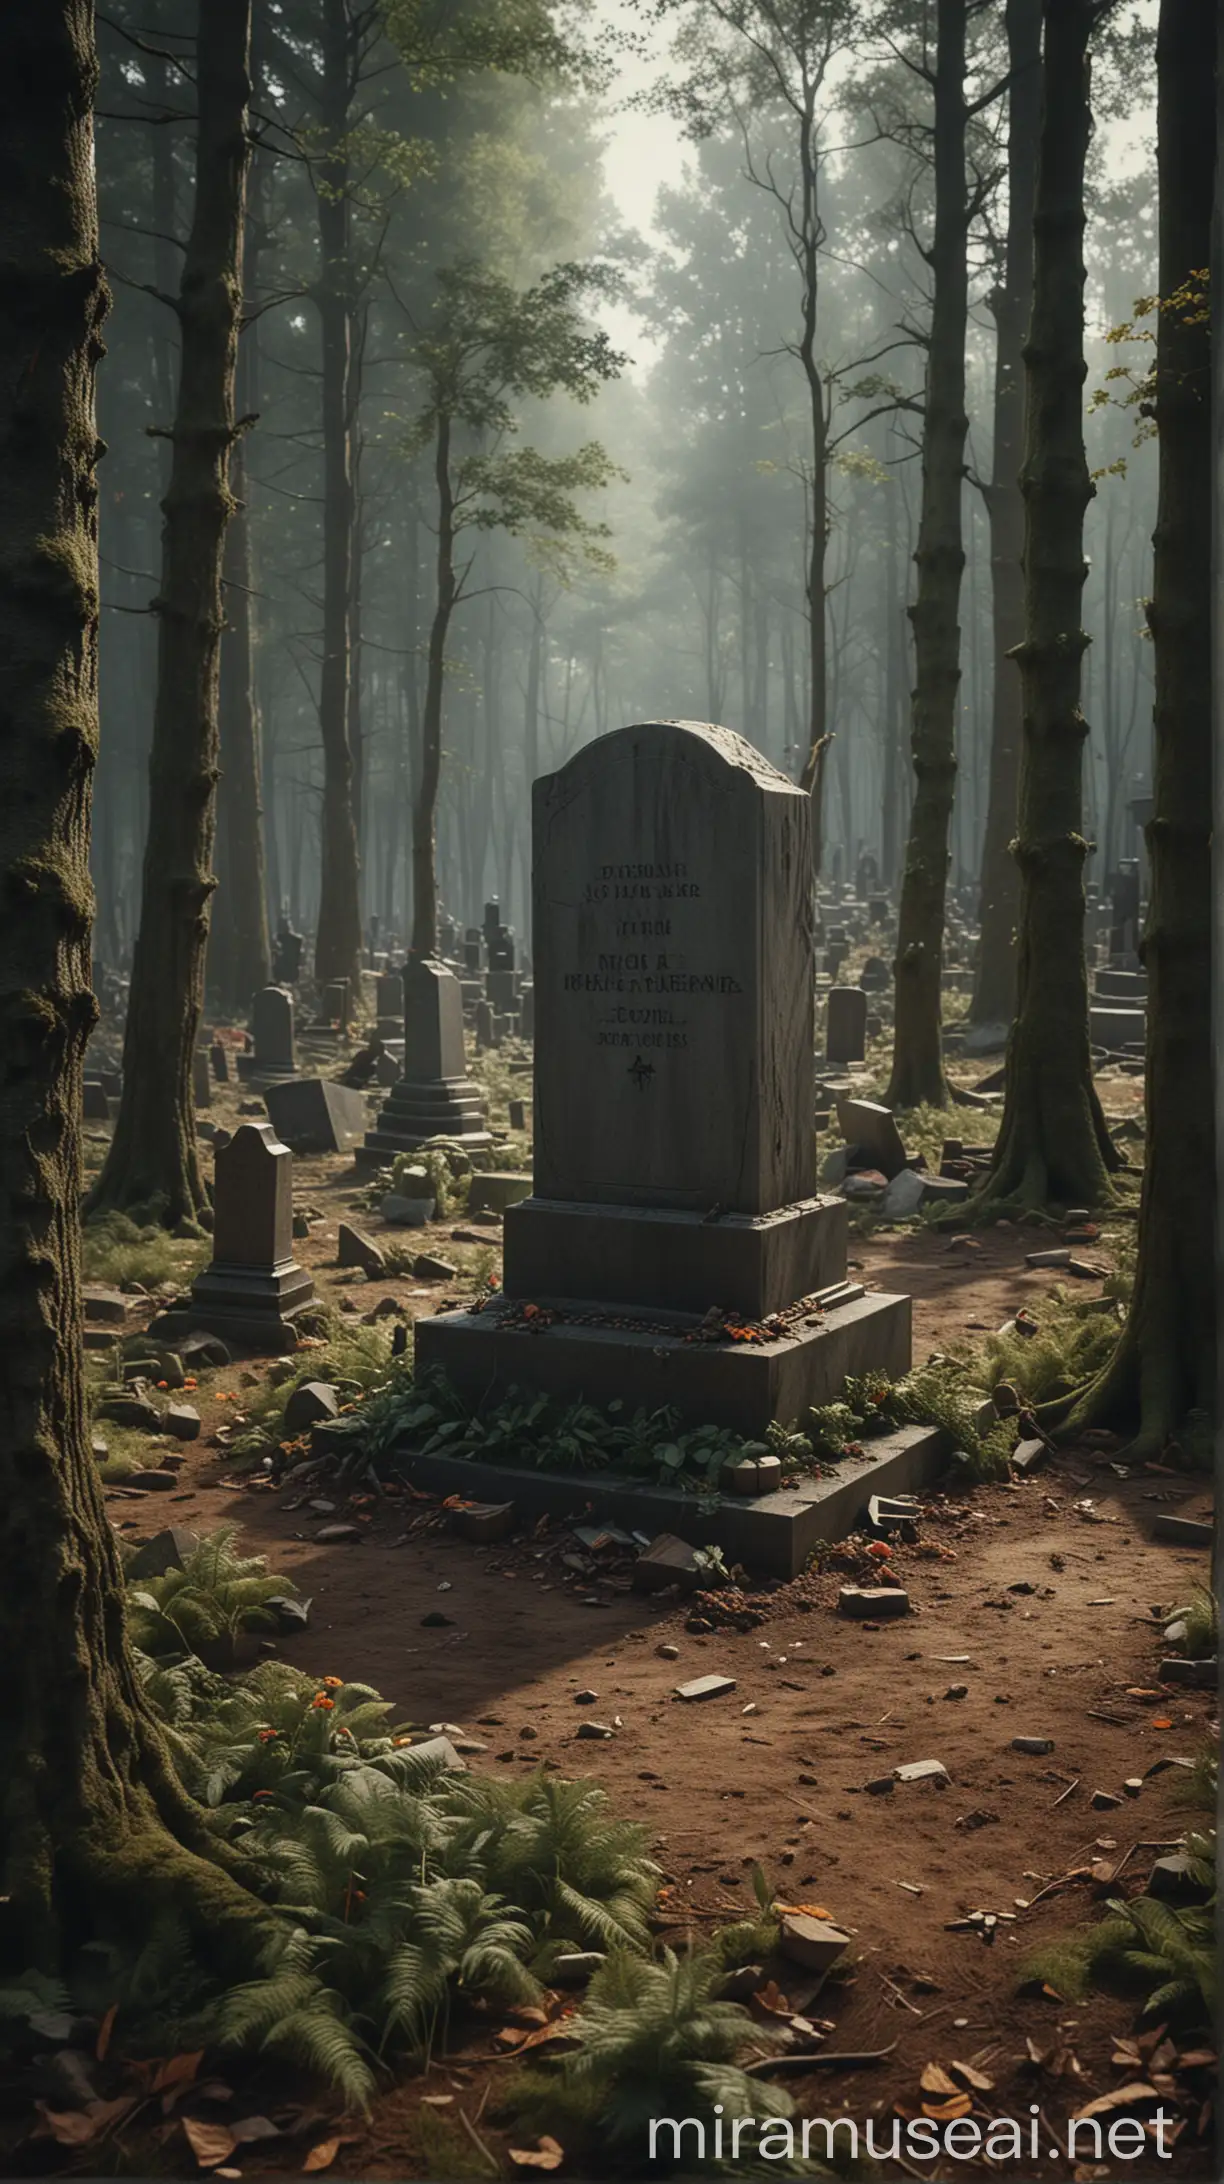 a grave placed in the middle of the woods, ultra realistic, portrait mode, central composition,  a lot of free space around, peopledancing around it
